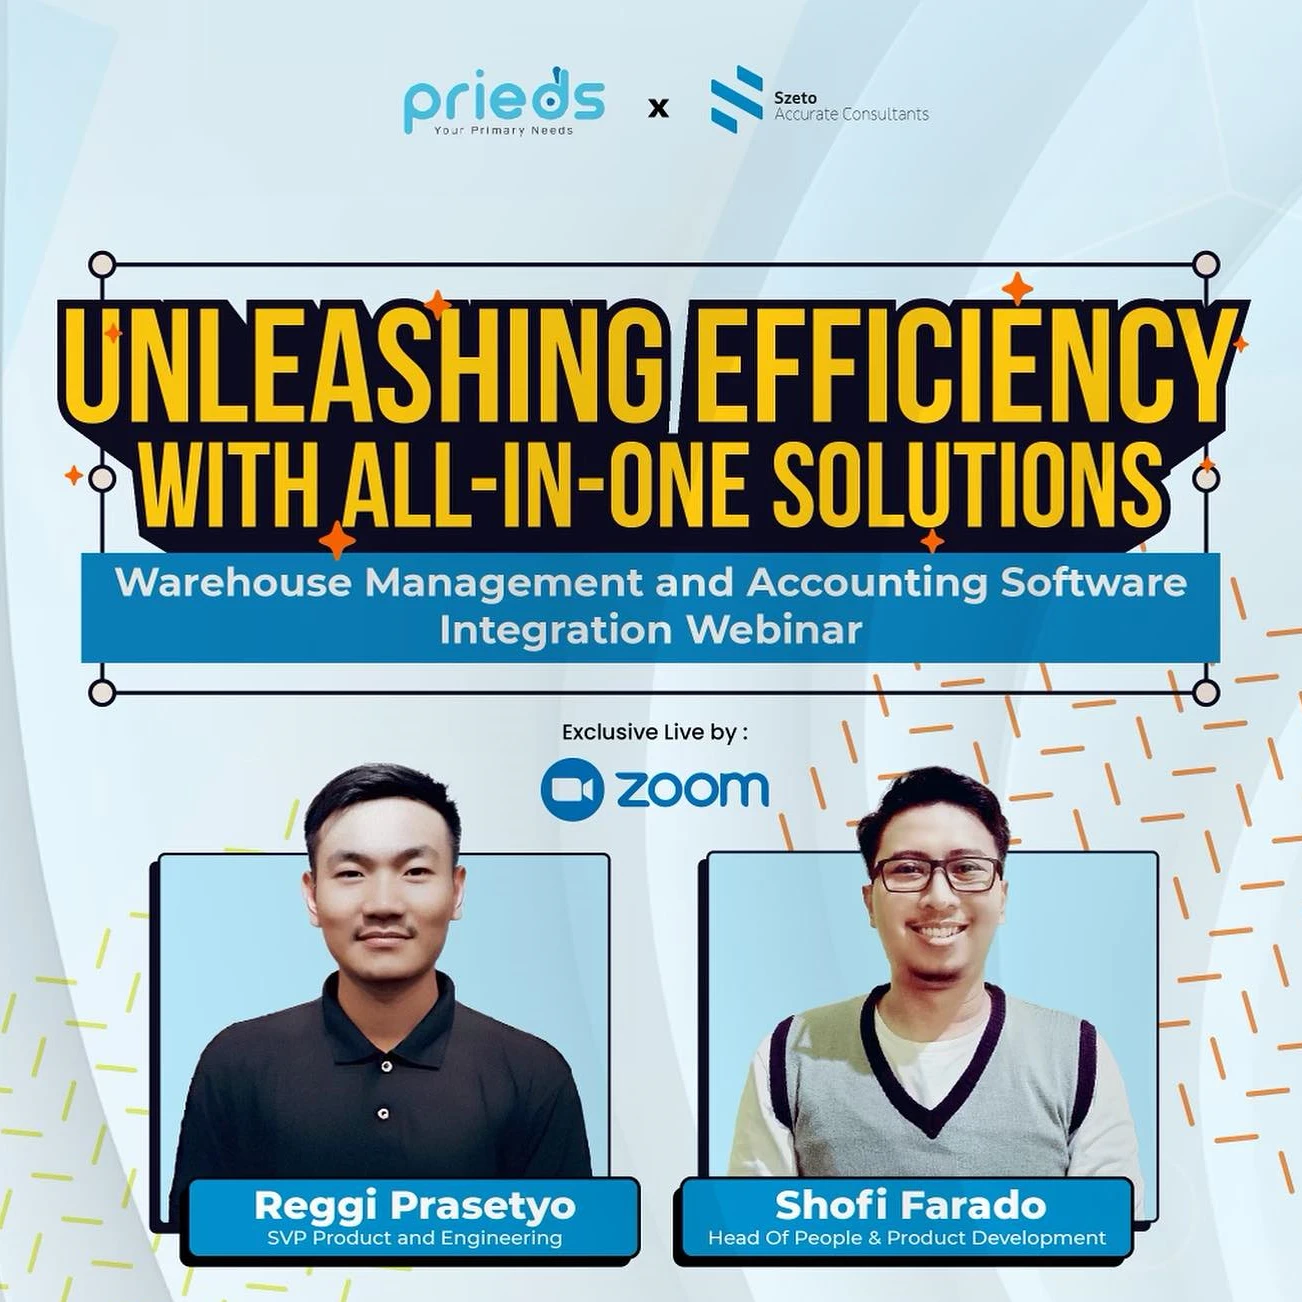 Unleashing Efficiency with All-in-One Solutions Event